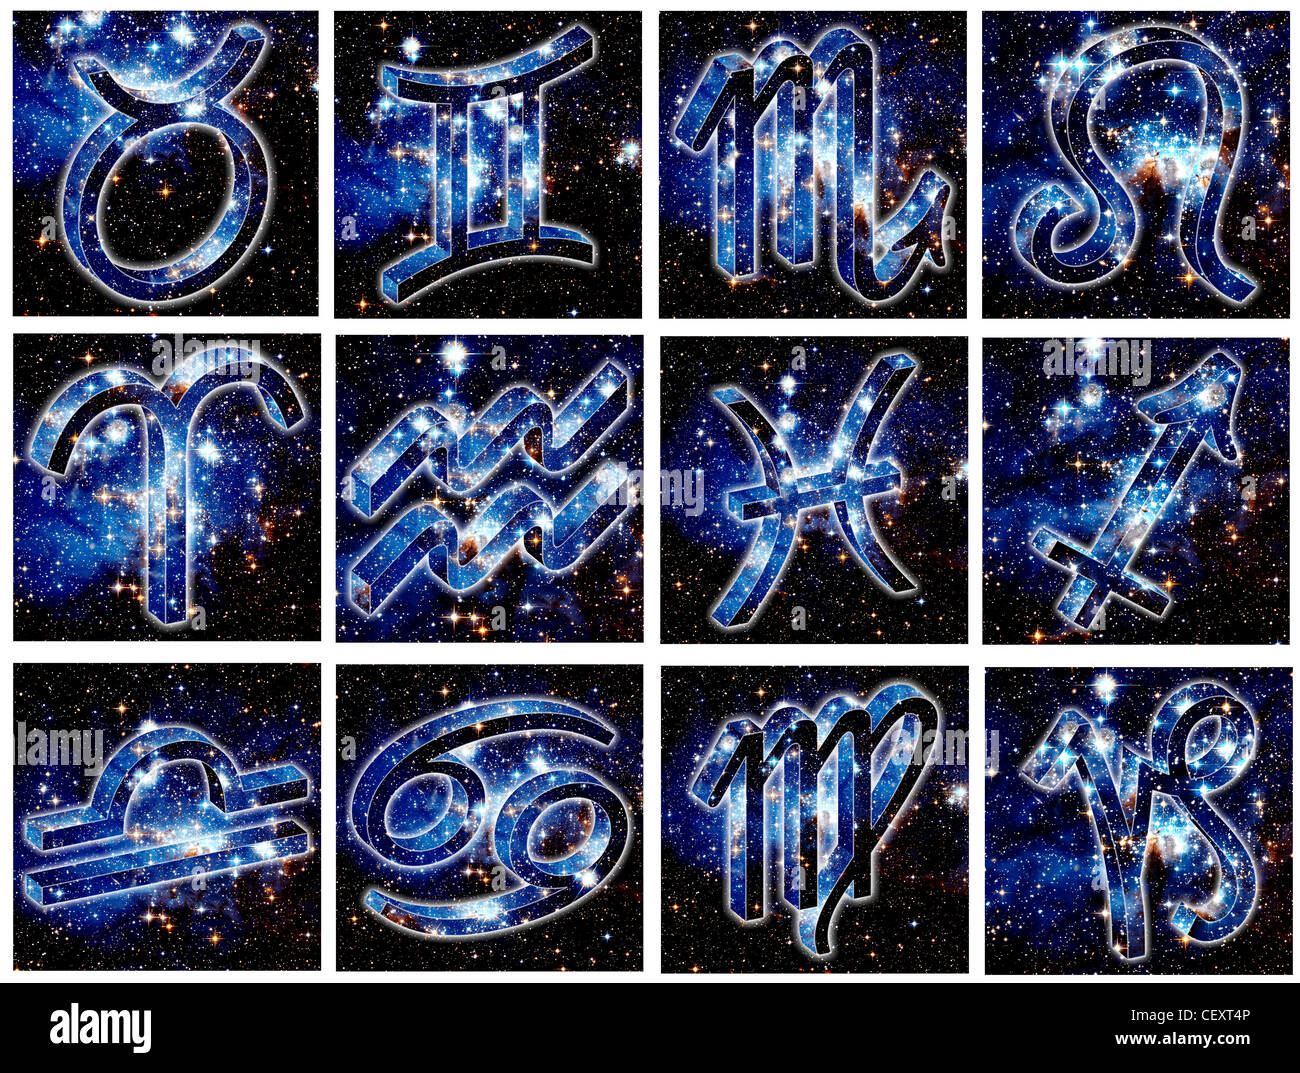 Illustrated star signs A set of night sky astrological star signs set against a background of space filled with stars Stock Photo